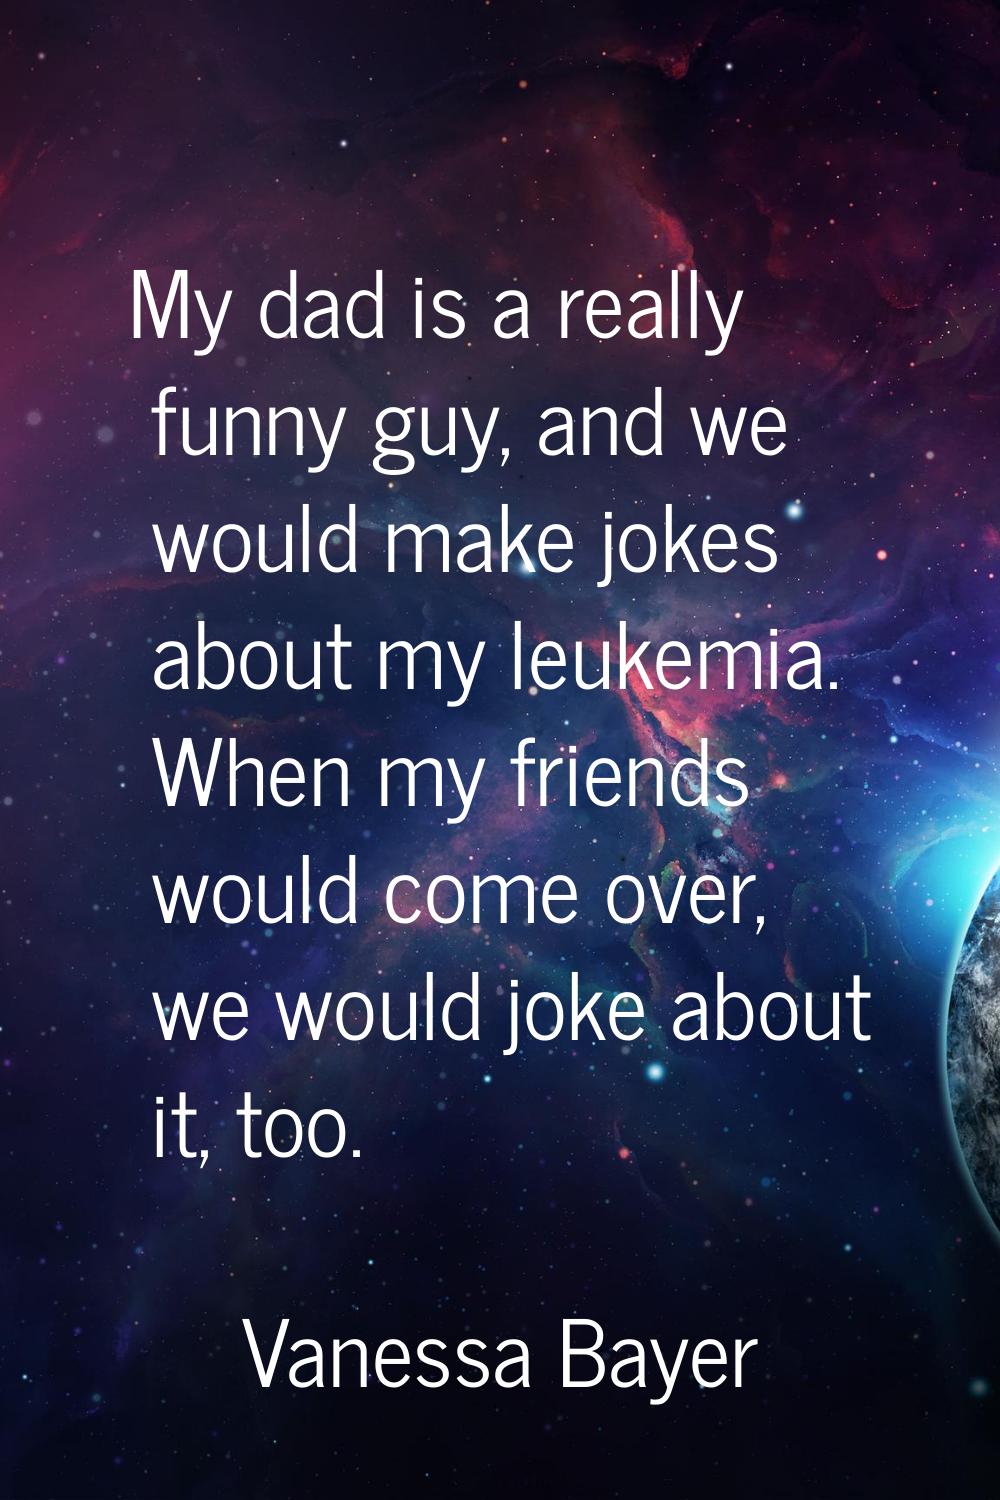 My dad is a really funny guy, and we would make jokes about my leukemia. When my friends would come